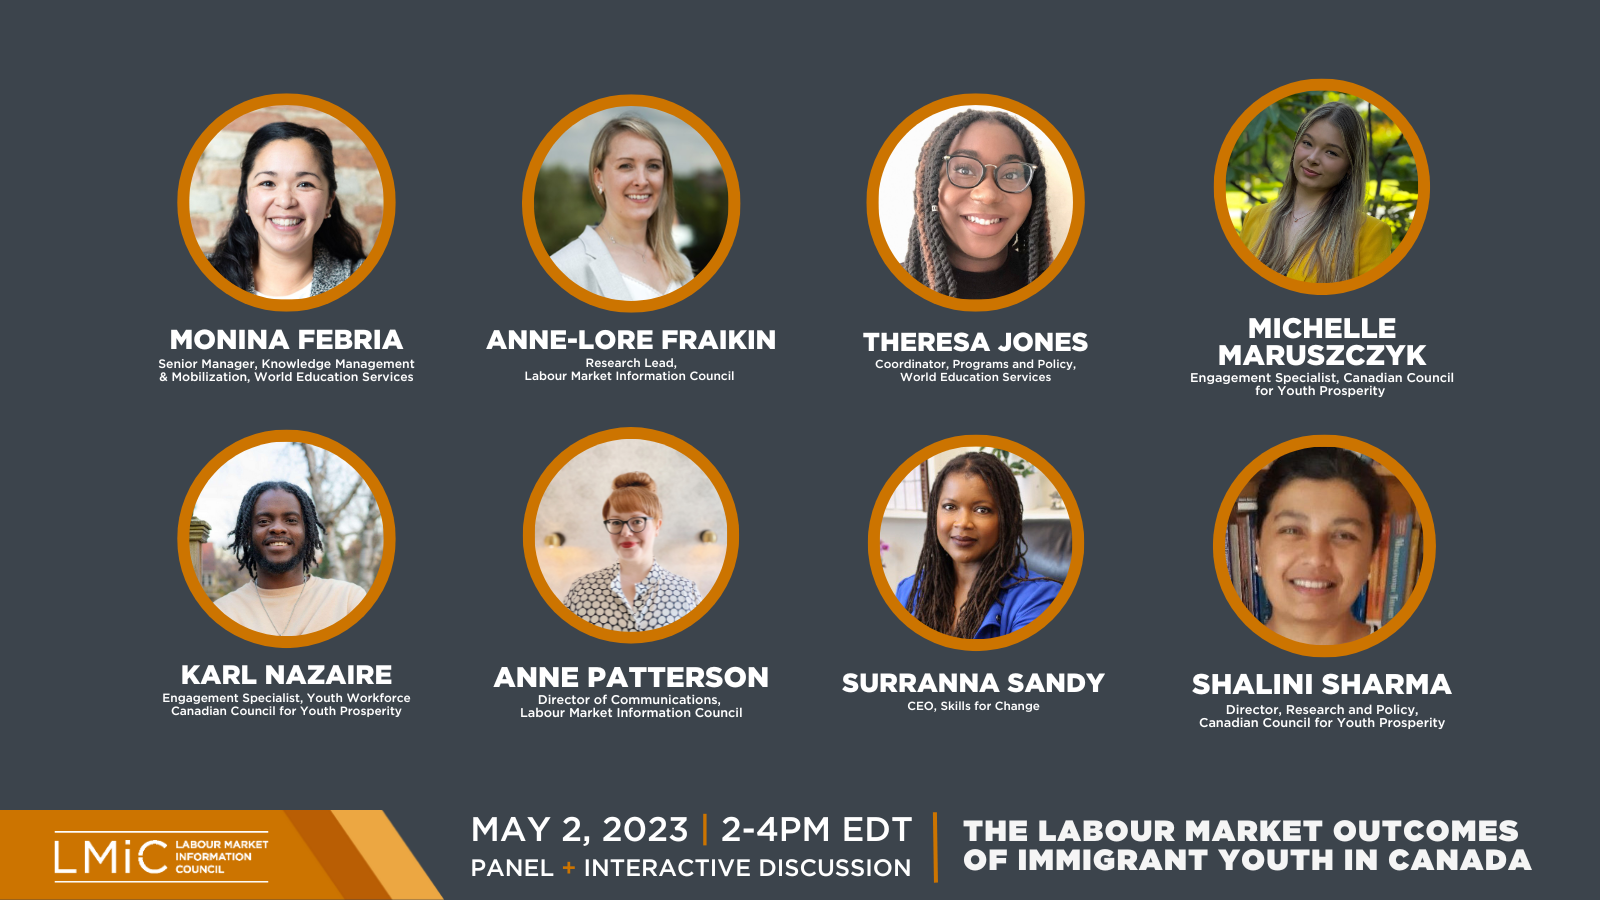 List of speakers at the May 2 webinar about the labour market outcomes of immigrant youth in Canada, including their headshots.